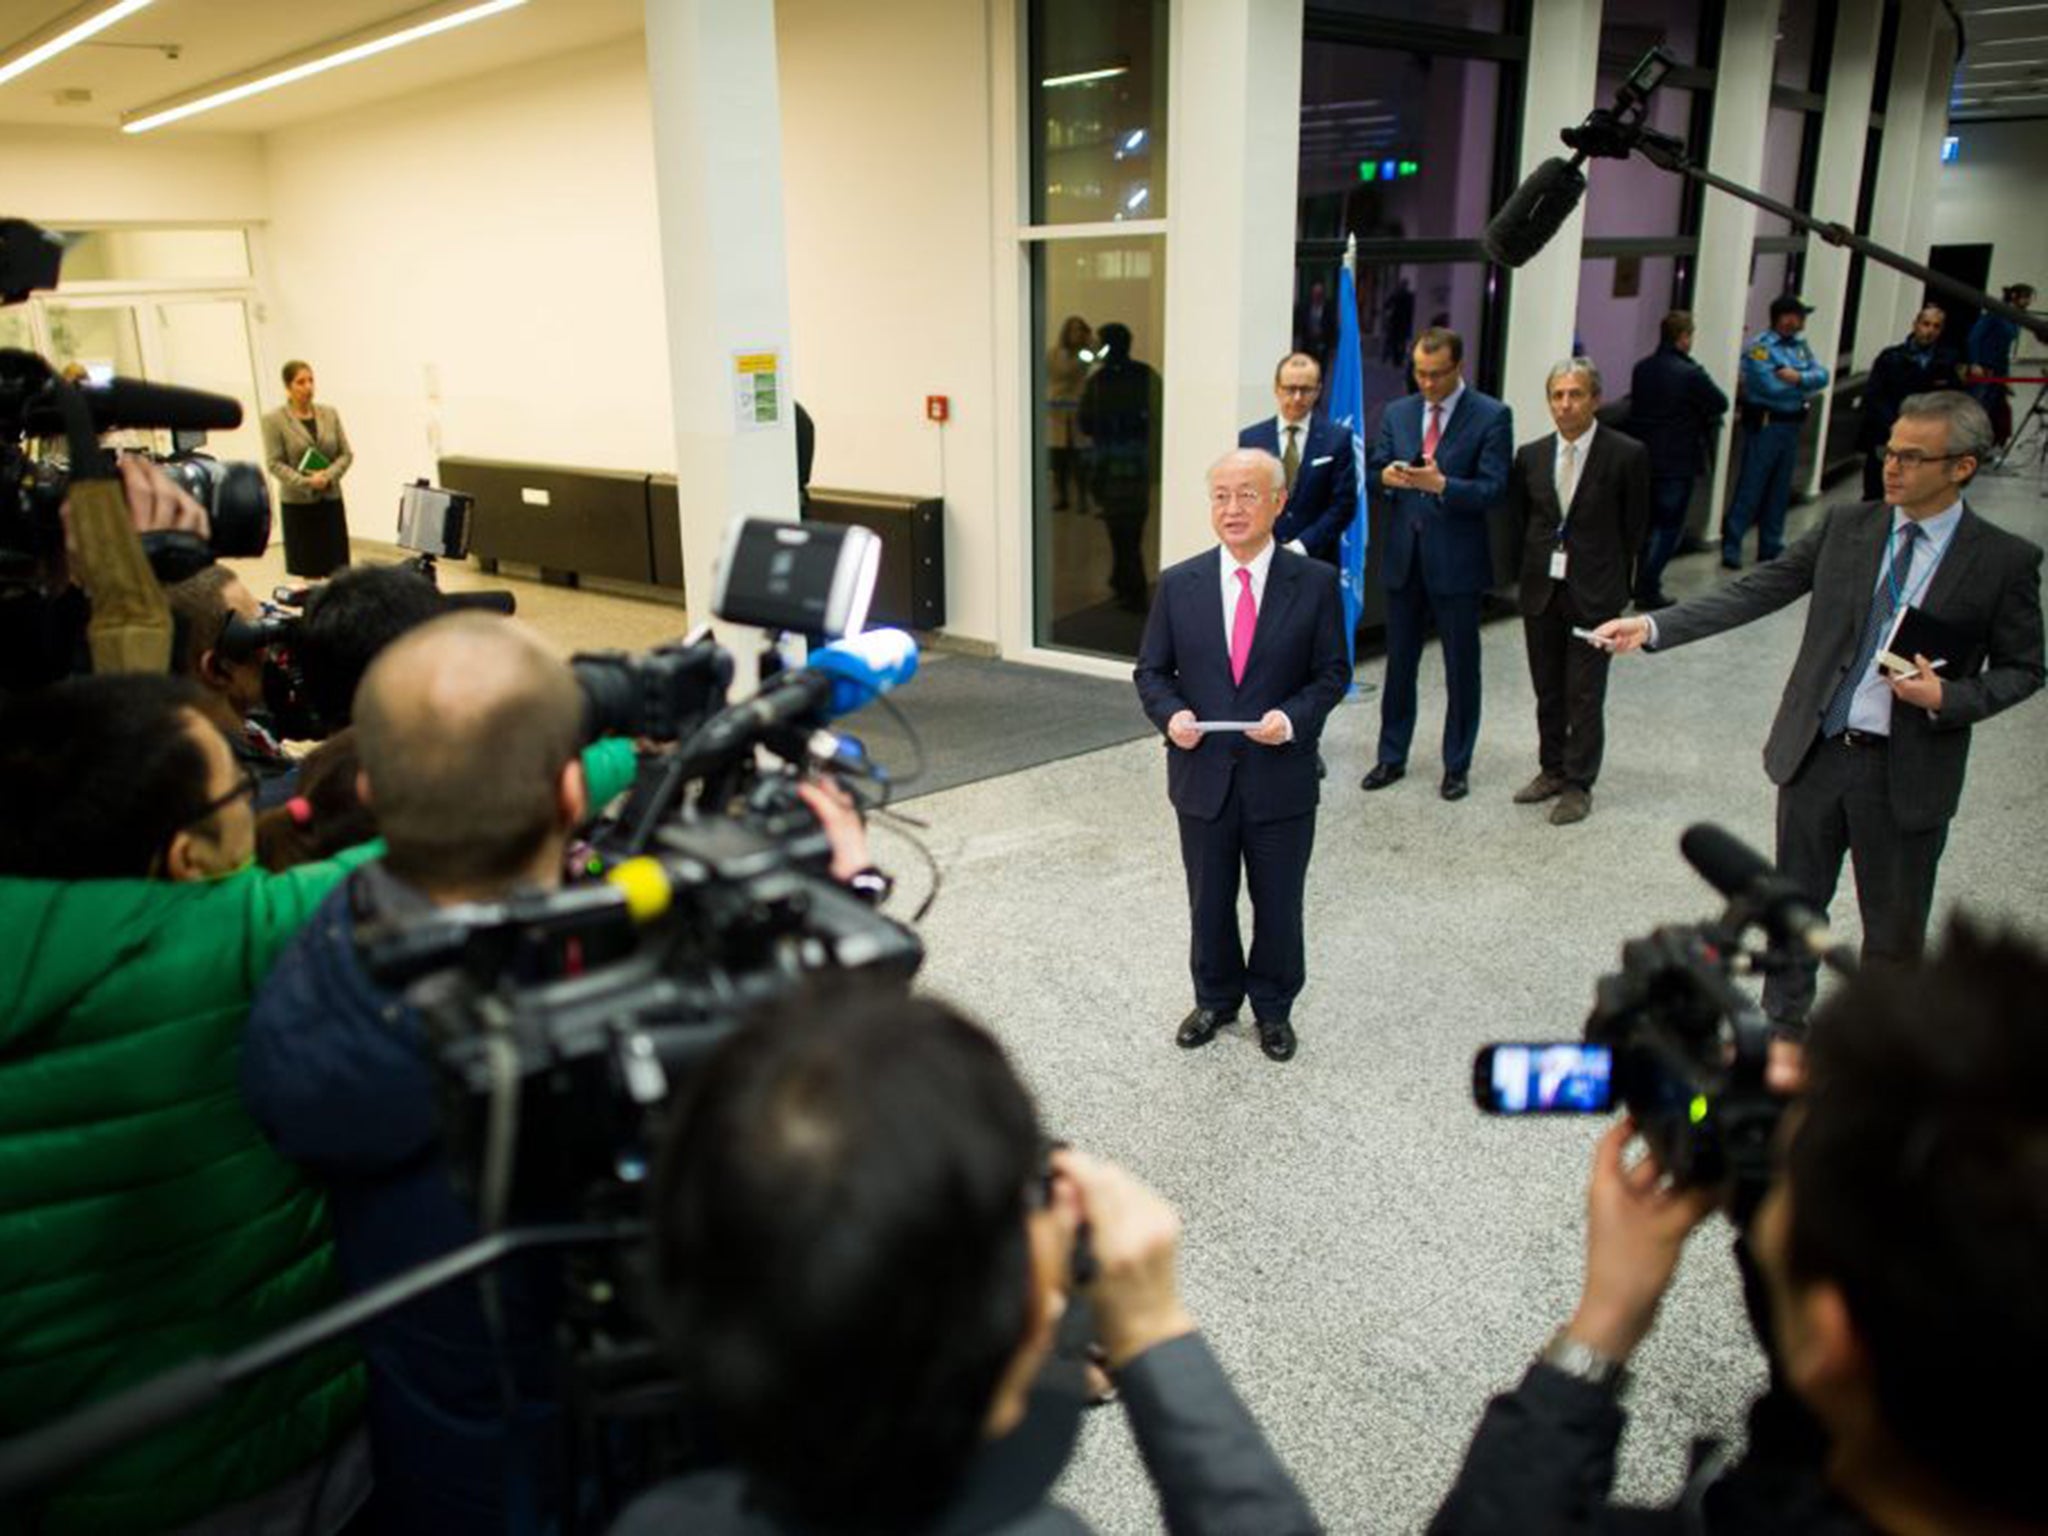 Director General of the International Atomic Energy Agency, Yukiya Amano, addresses the media after the conclusion of the talks in Vienna